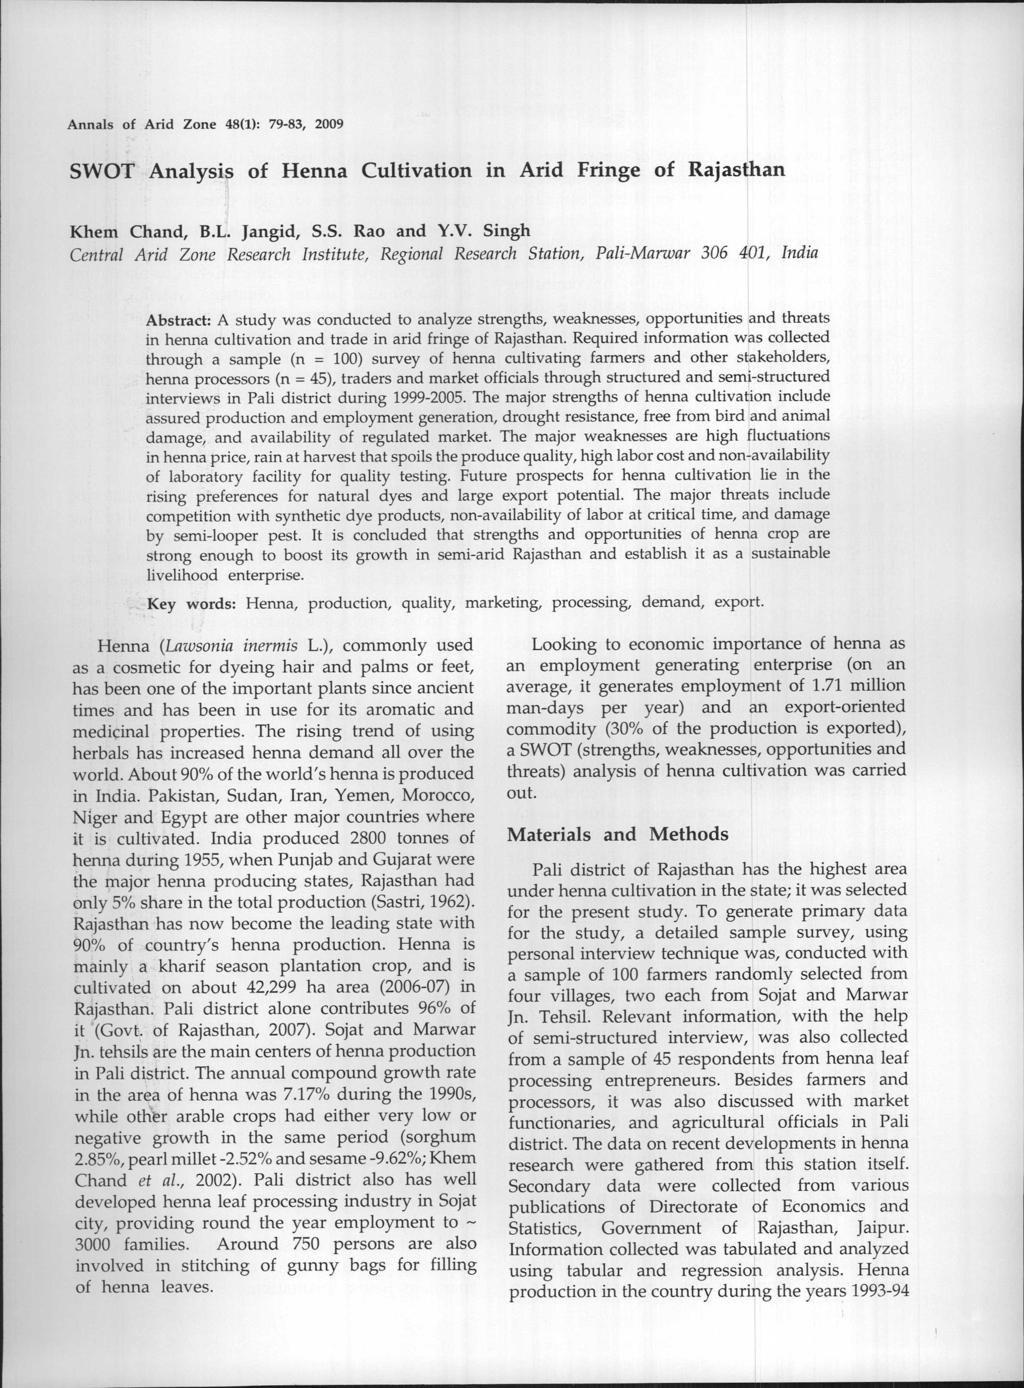 Annals of Arid Zone 48(1): 79-83, 2009 SWOT Analysir of Henna Cultivation in Arid Fringe of Rajas I an i -I ) Khem Chand, B.L. Jangid, 5.5. Rao and Y.V.